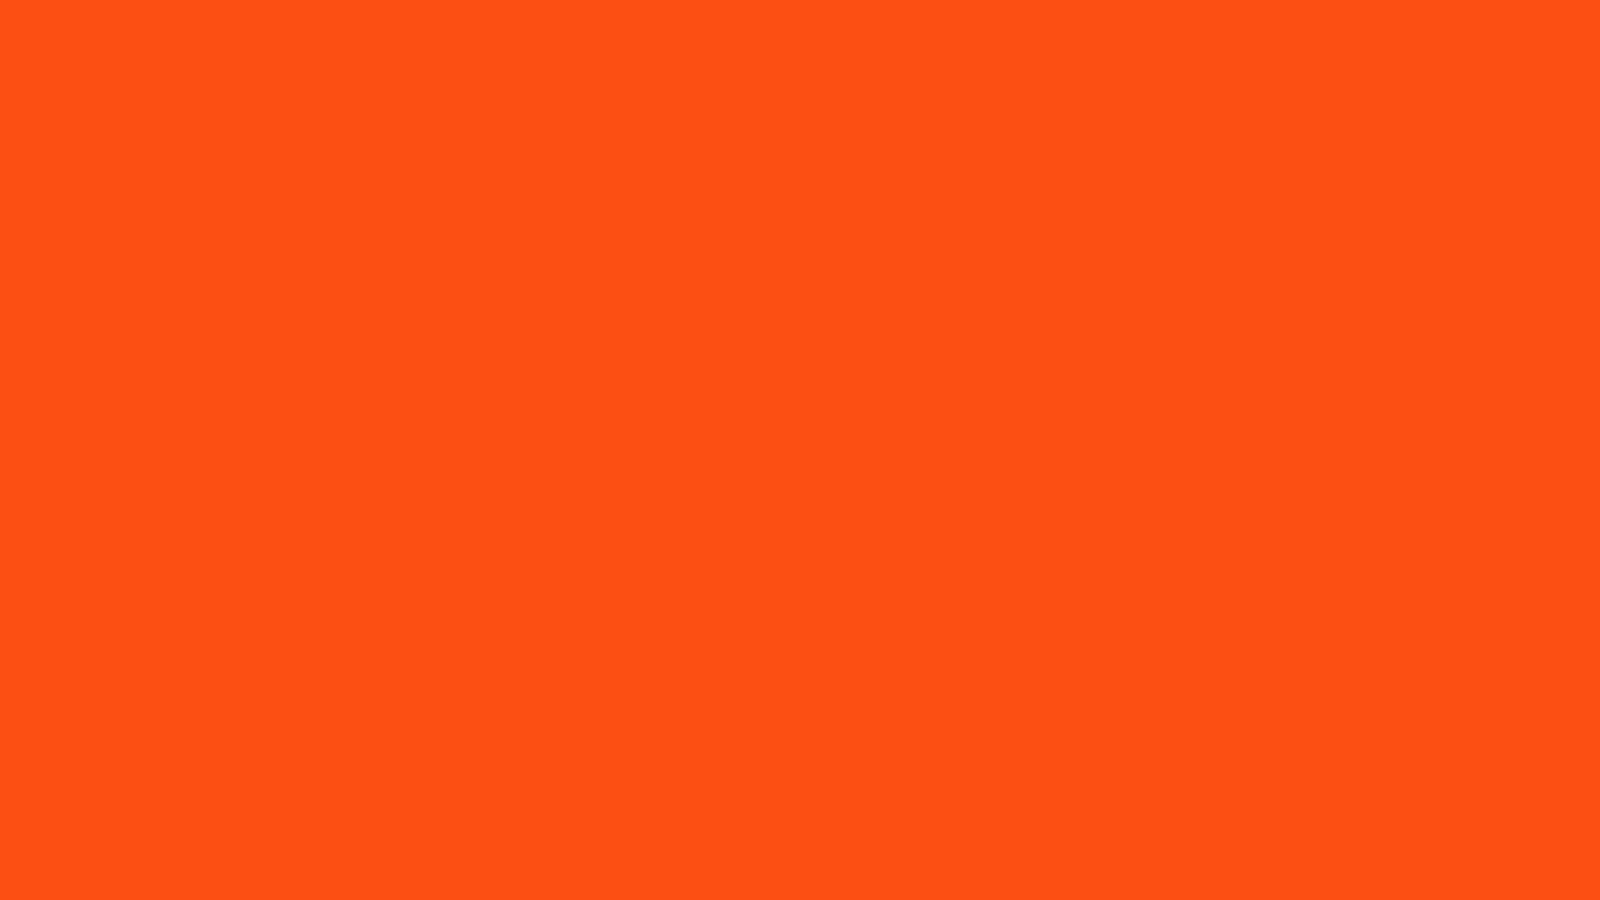 Orange solid color background view and download the below background 1600x900